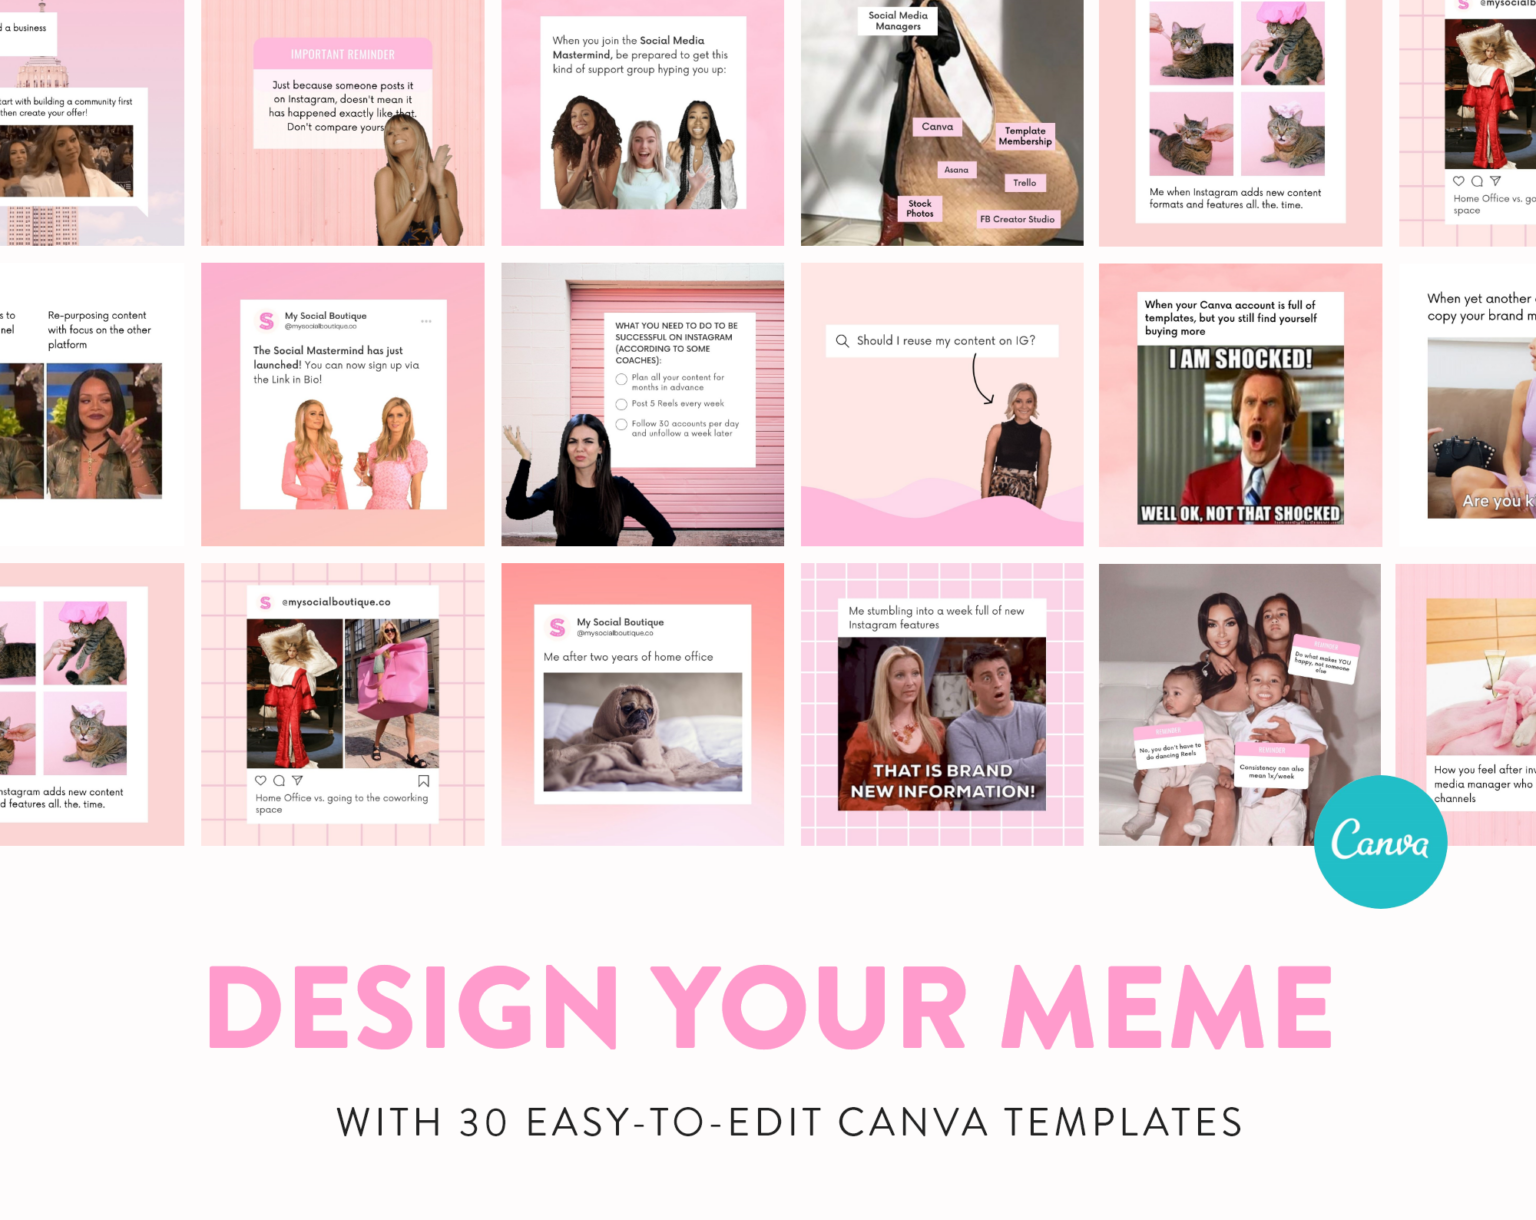 memes-gifs-Instagram-feed-post-templates-canva-design-overview-2